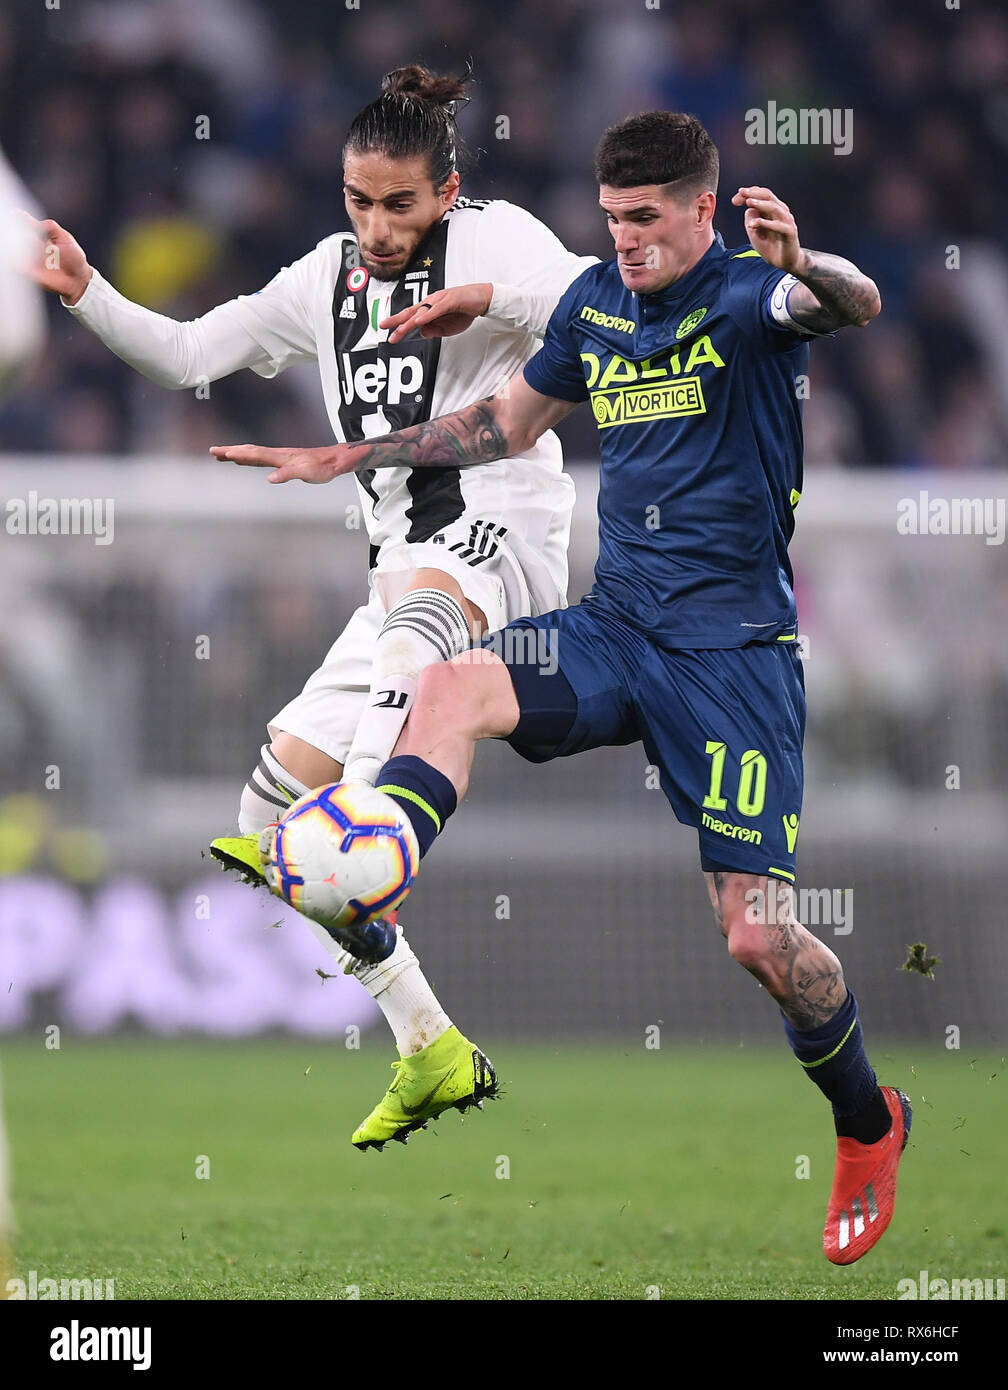 Turin, Italy. 8th Mar, 2019. FC Juventus's Martin Caceres (L) vies with Udinese's Rodrigo De Paul during a Serie A soccer match between Juventus and Udinese in Turin, Italy, March 8, 2019. Juventus won 4-1. Credit: Alberto Lingria/Xinhua/Alamy Live News Stock Photo